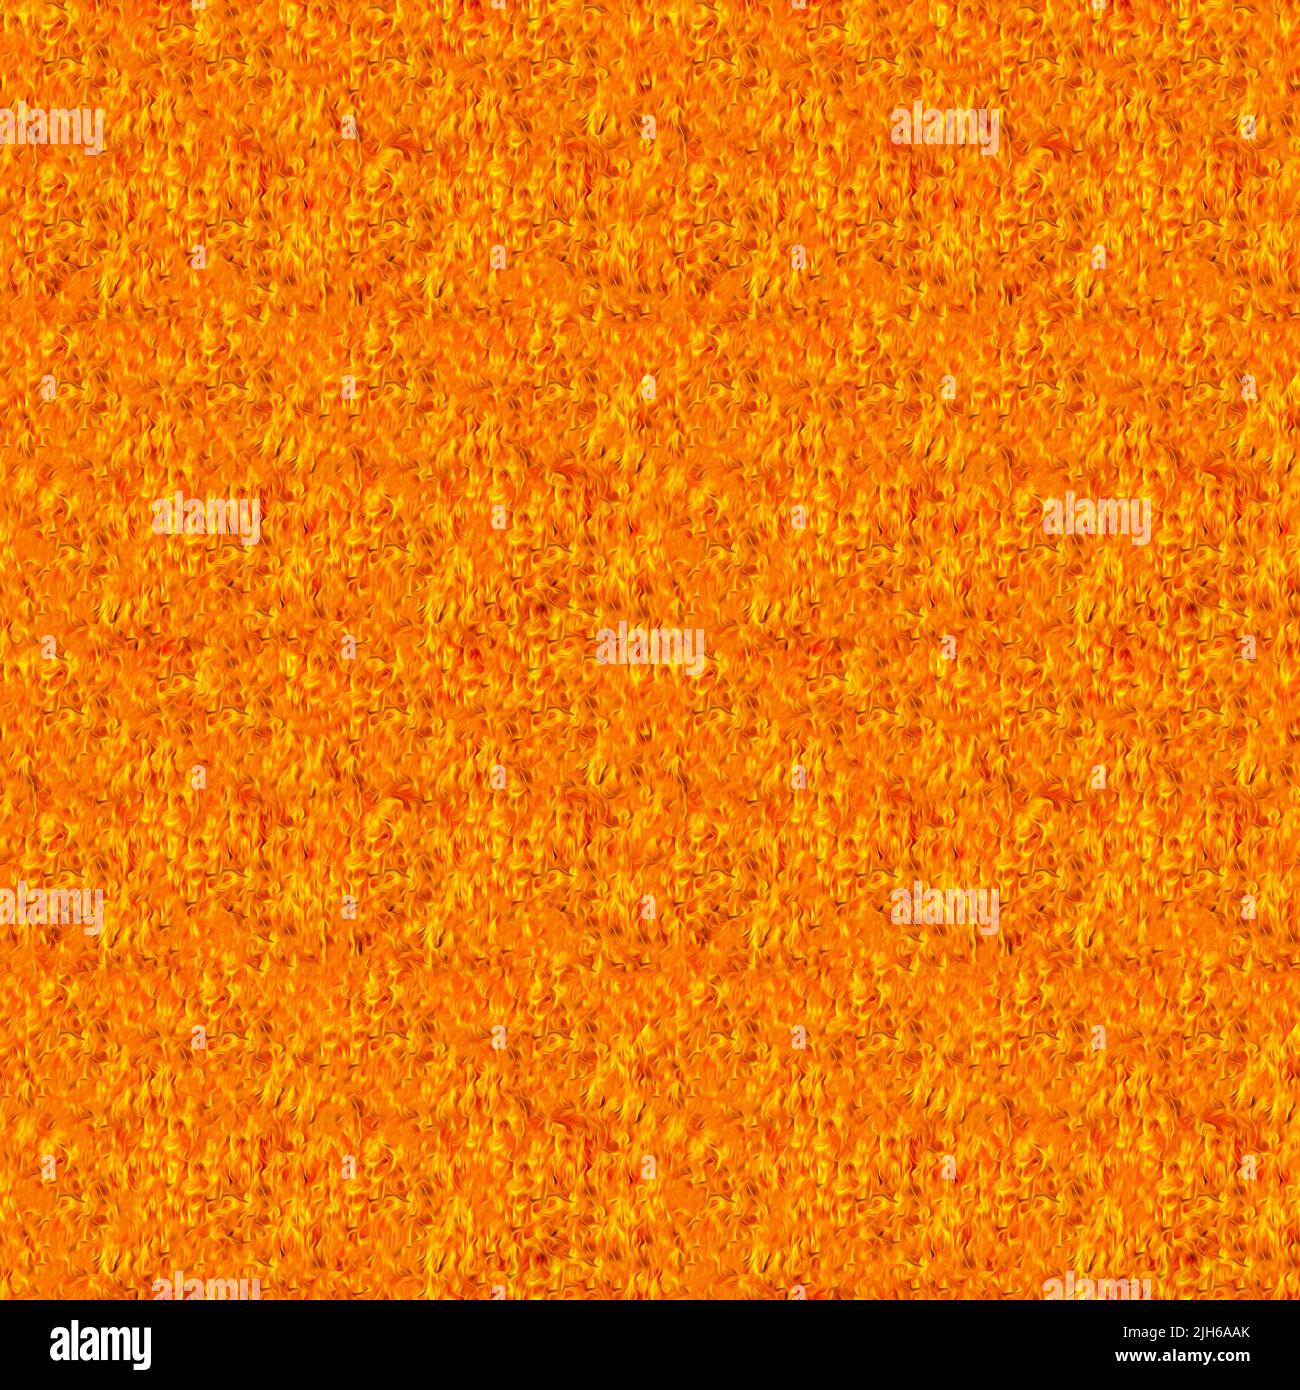 Abstract seamless pattern. Endless texture of fire Stock Photo